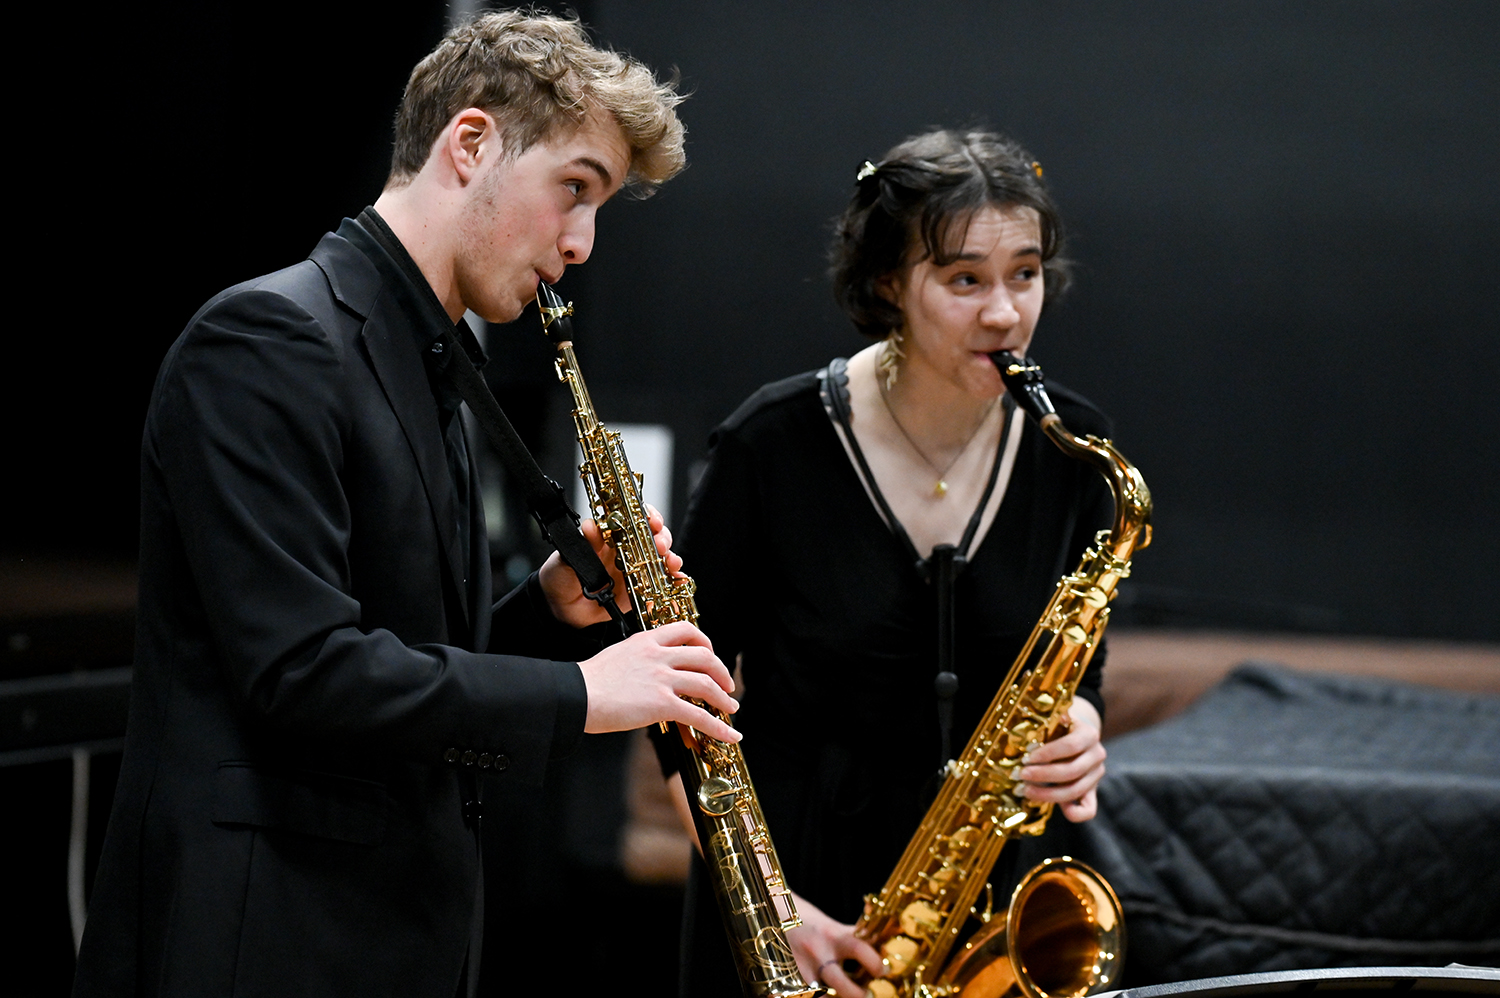 Two saxophone players performing in the Performance Studio